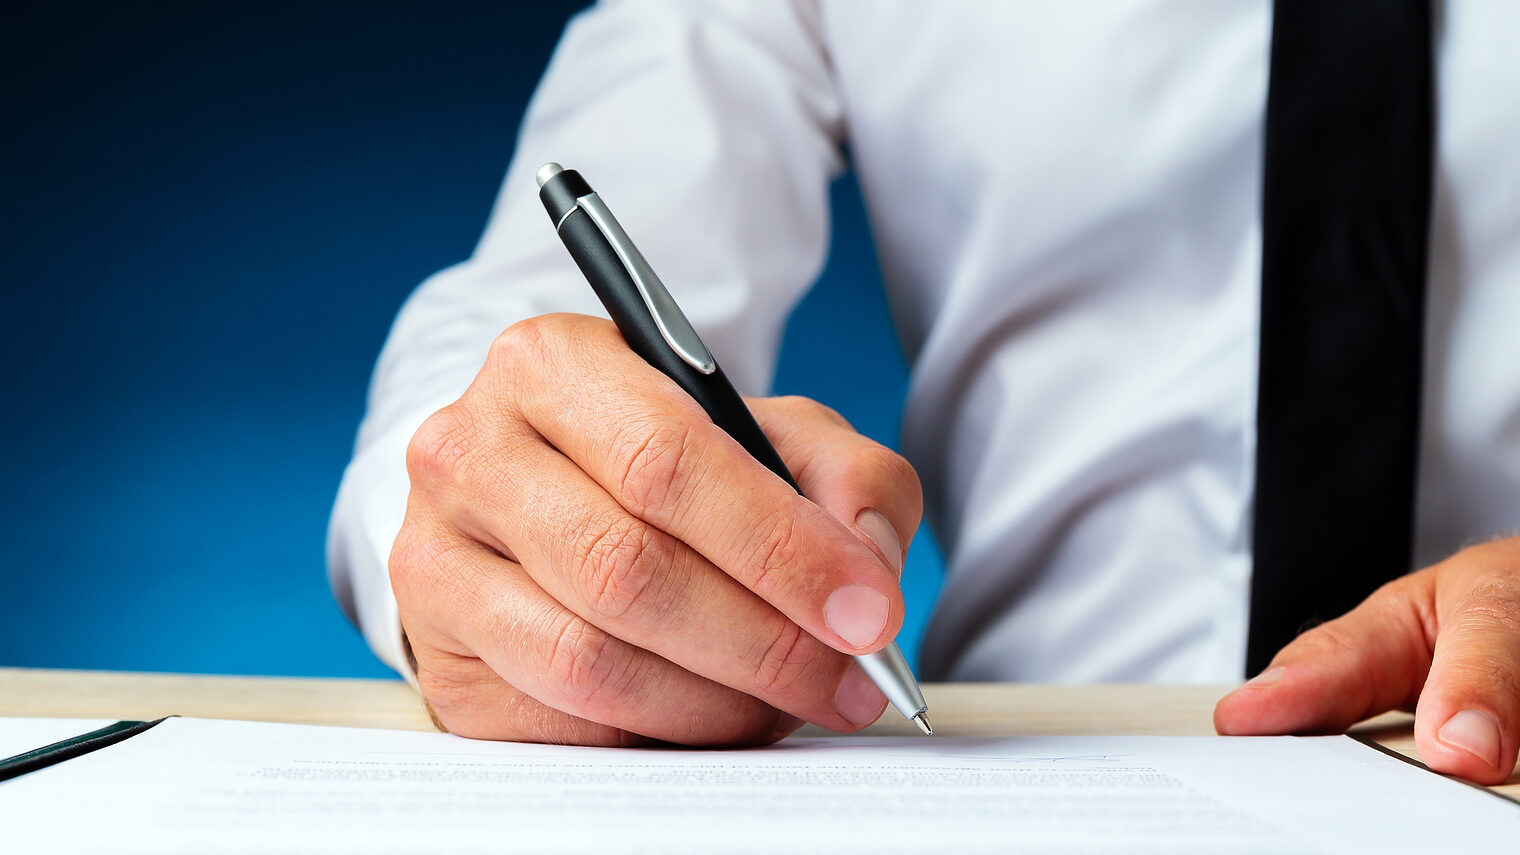 Business manager signing a document in a folder on his desk. Over dark blue background. Schlagwort(e): document, contract, legal, signing, form, deal, business, businessman, manager, lawyer, insurance, pen, successful, paperwork, signature, executive, agreement, write, official, employment, broker, occupation, formal, note, documentation, businessperson, subscription, lease, file, loan, plan, report, testament, attorney, employer, final, statement, realtor, briefing, approved, investor, economy, folder, corporate, working, entrepreneur, career, blue, background